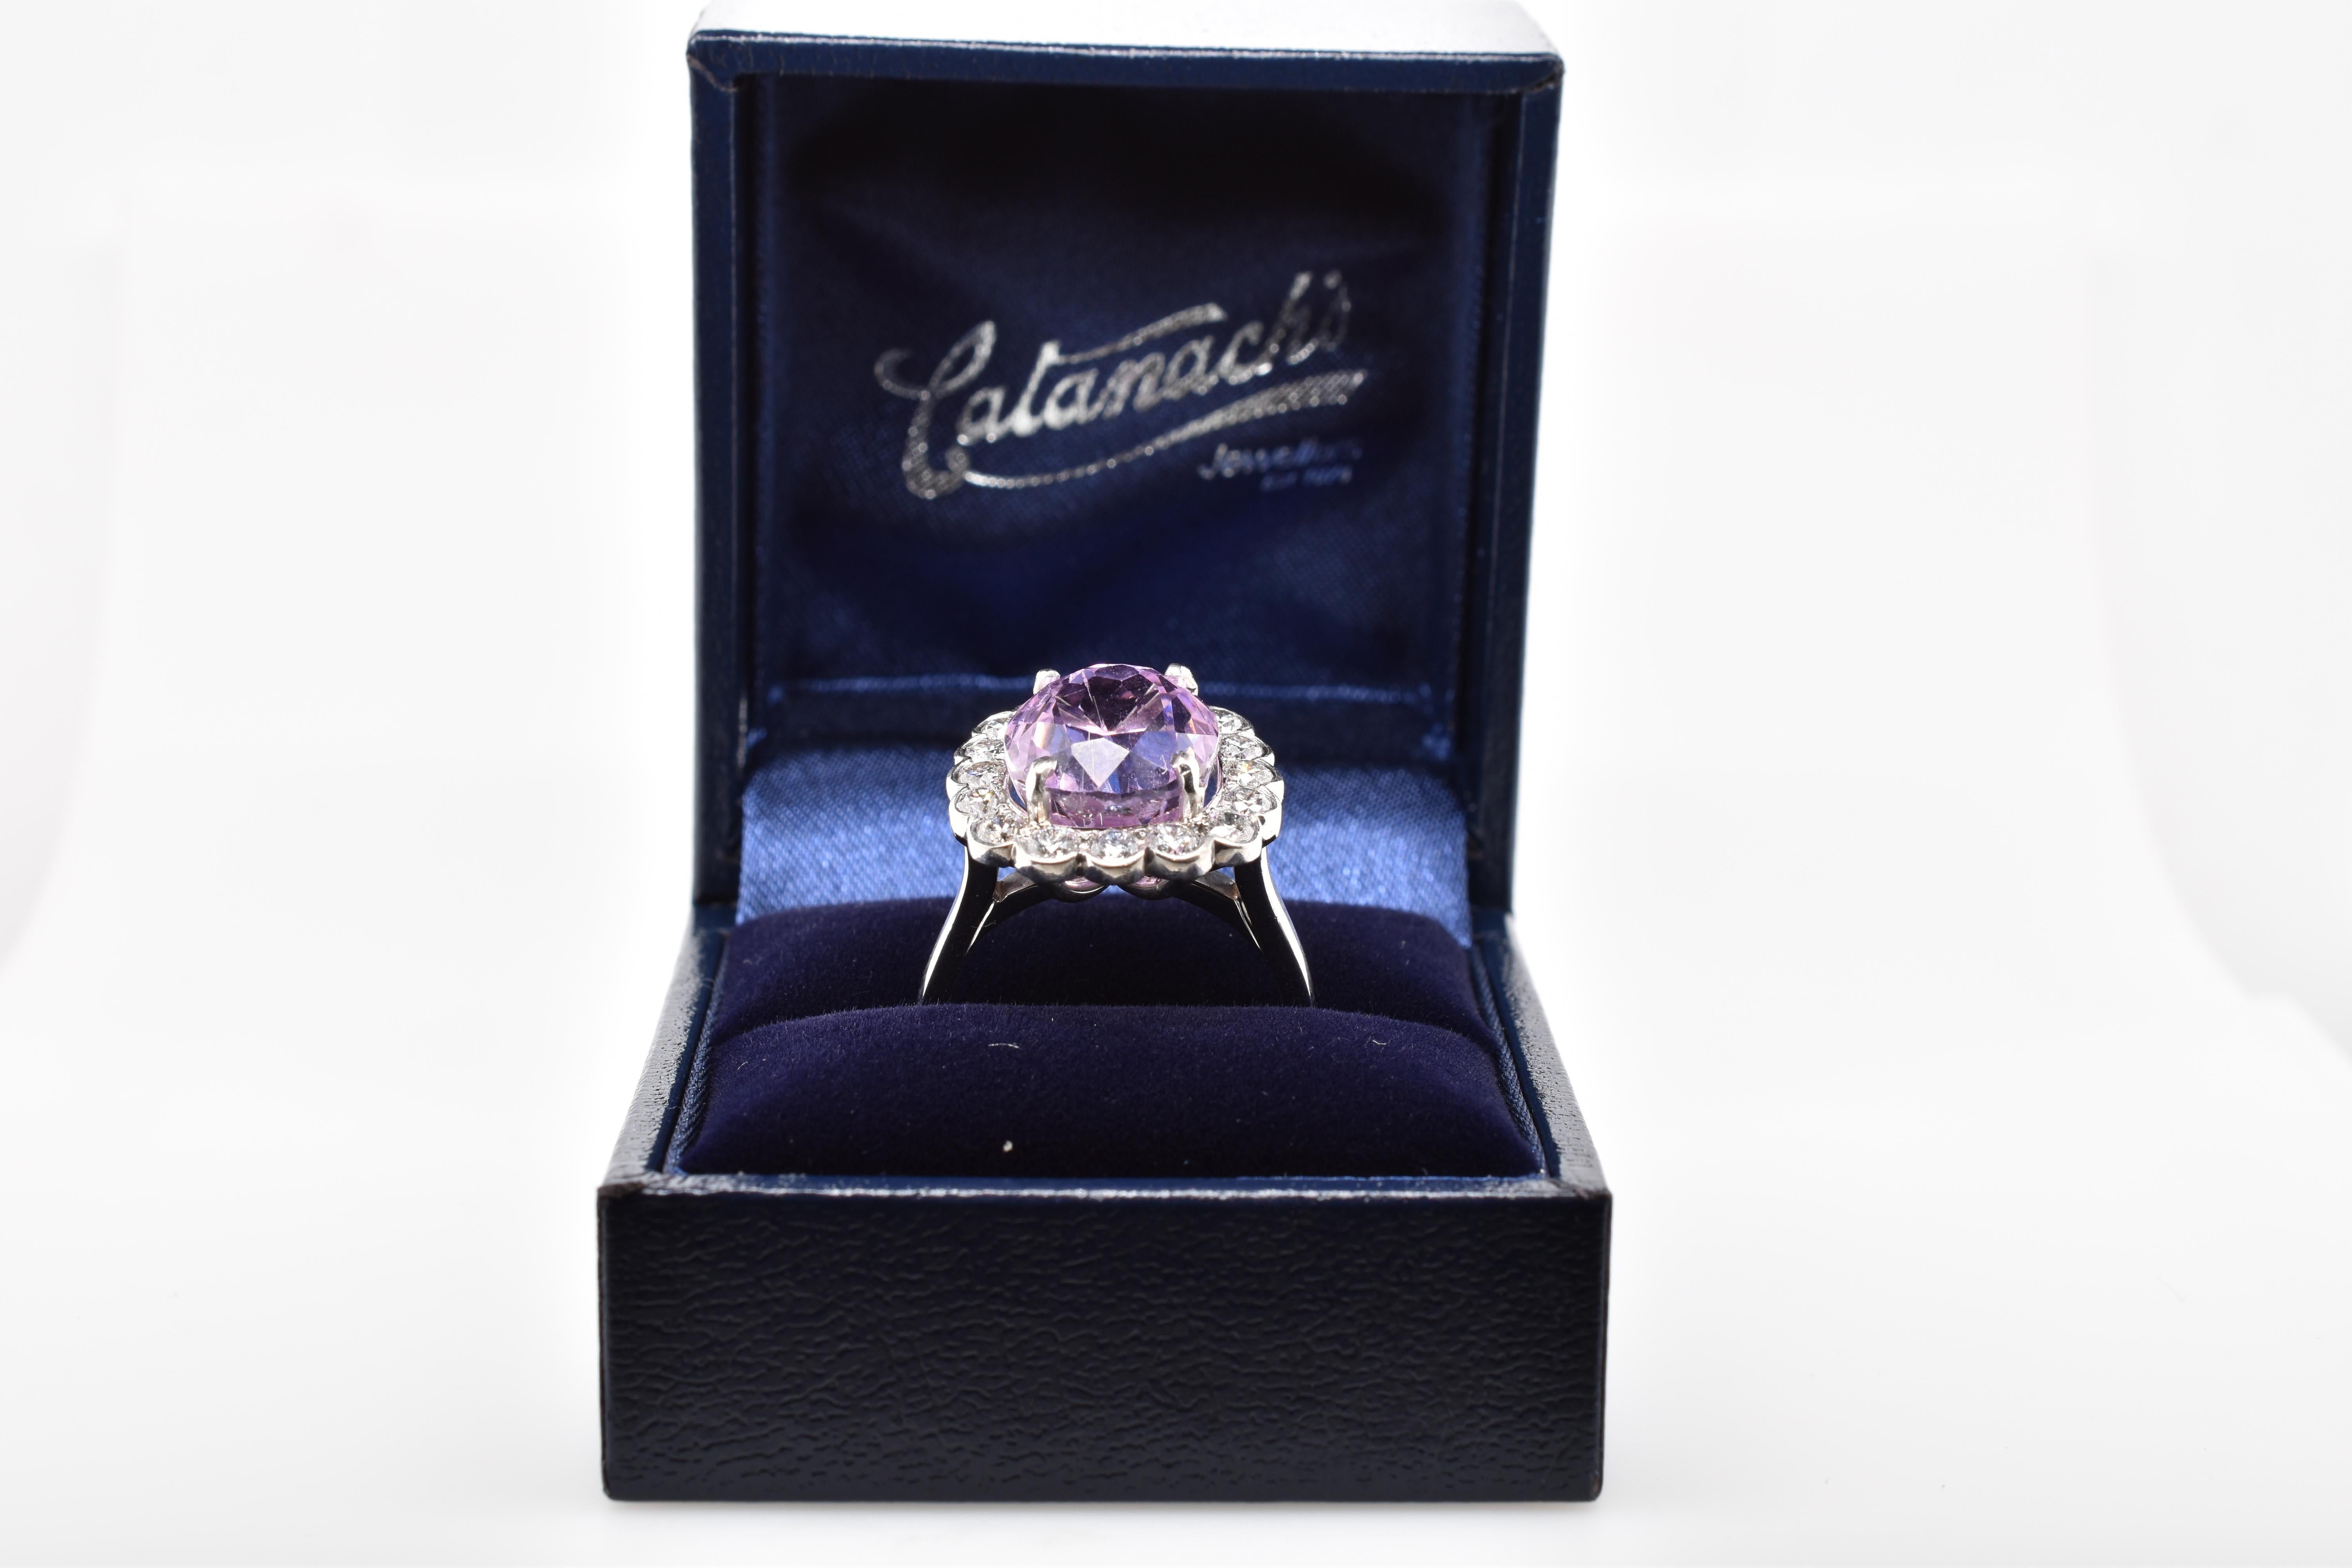 Large oval pink Kunzite and brilliant cut diamonds set in a handmade 18ct white gold scalloped cluster mount. The oval faceted kunzite is a candy pink colour and weighs 9.78ct and is surrounded by 16 round brilliant cut diamonds with a total weight